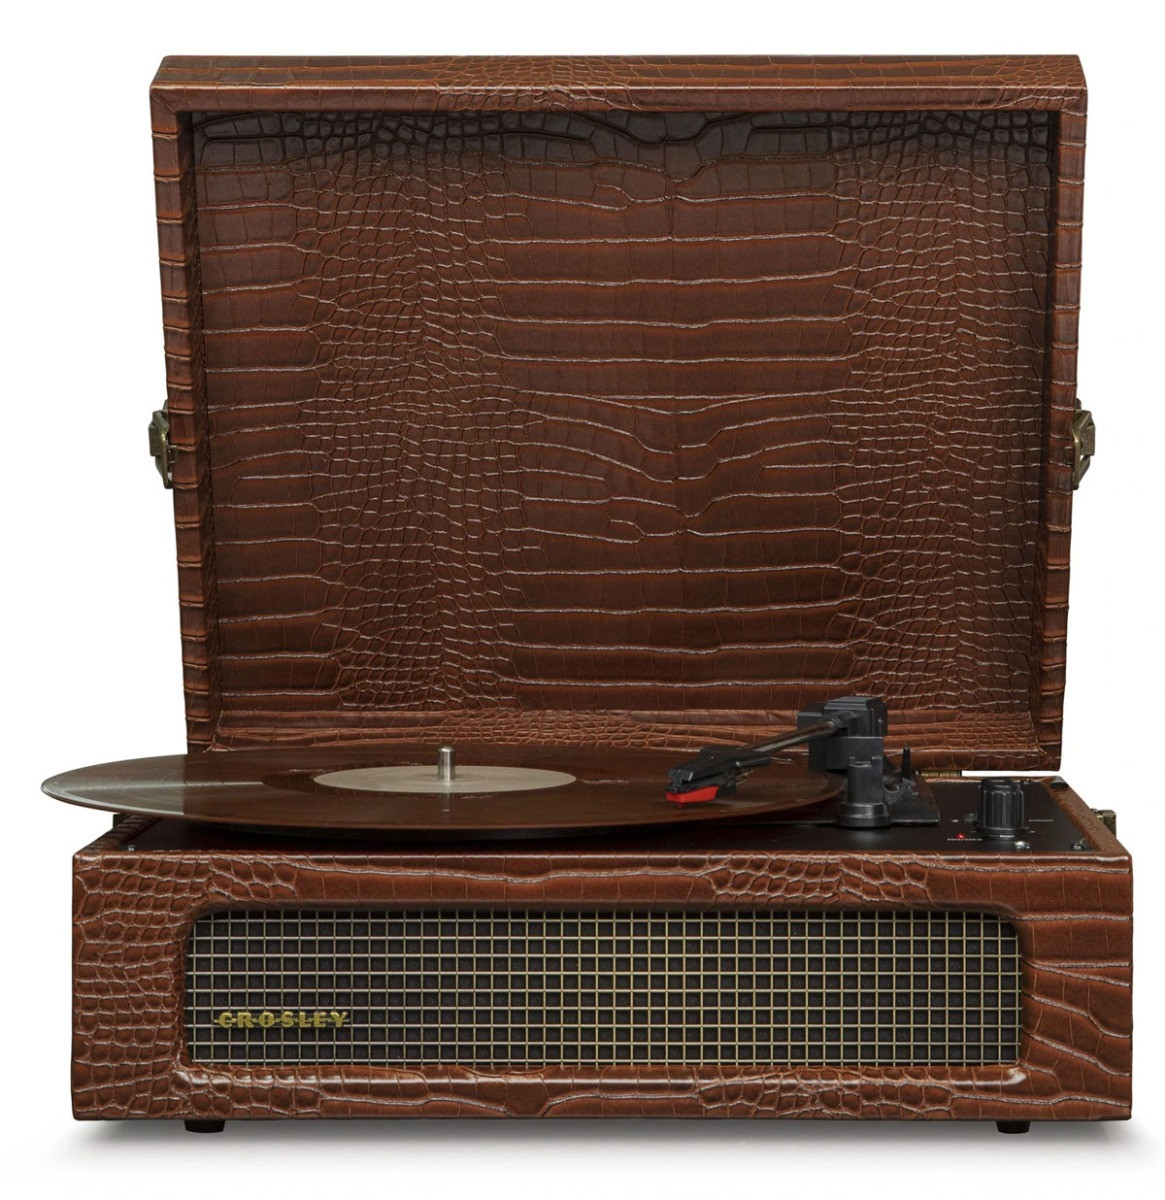 Crosley Voyager Portable Retro Platenspeler - Brown Croc - Bluetooth In/Out